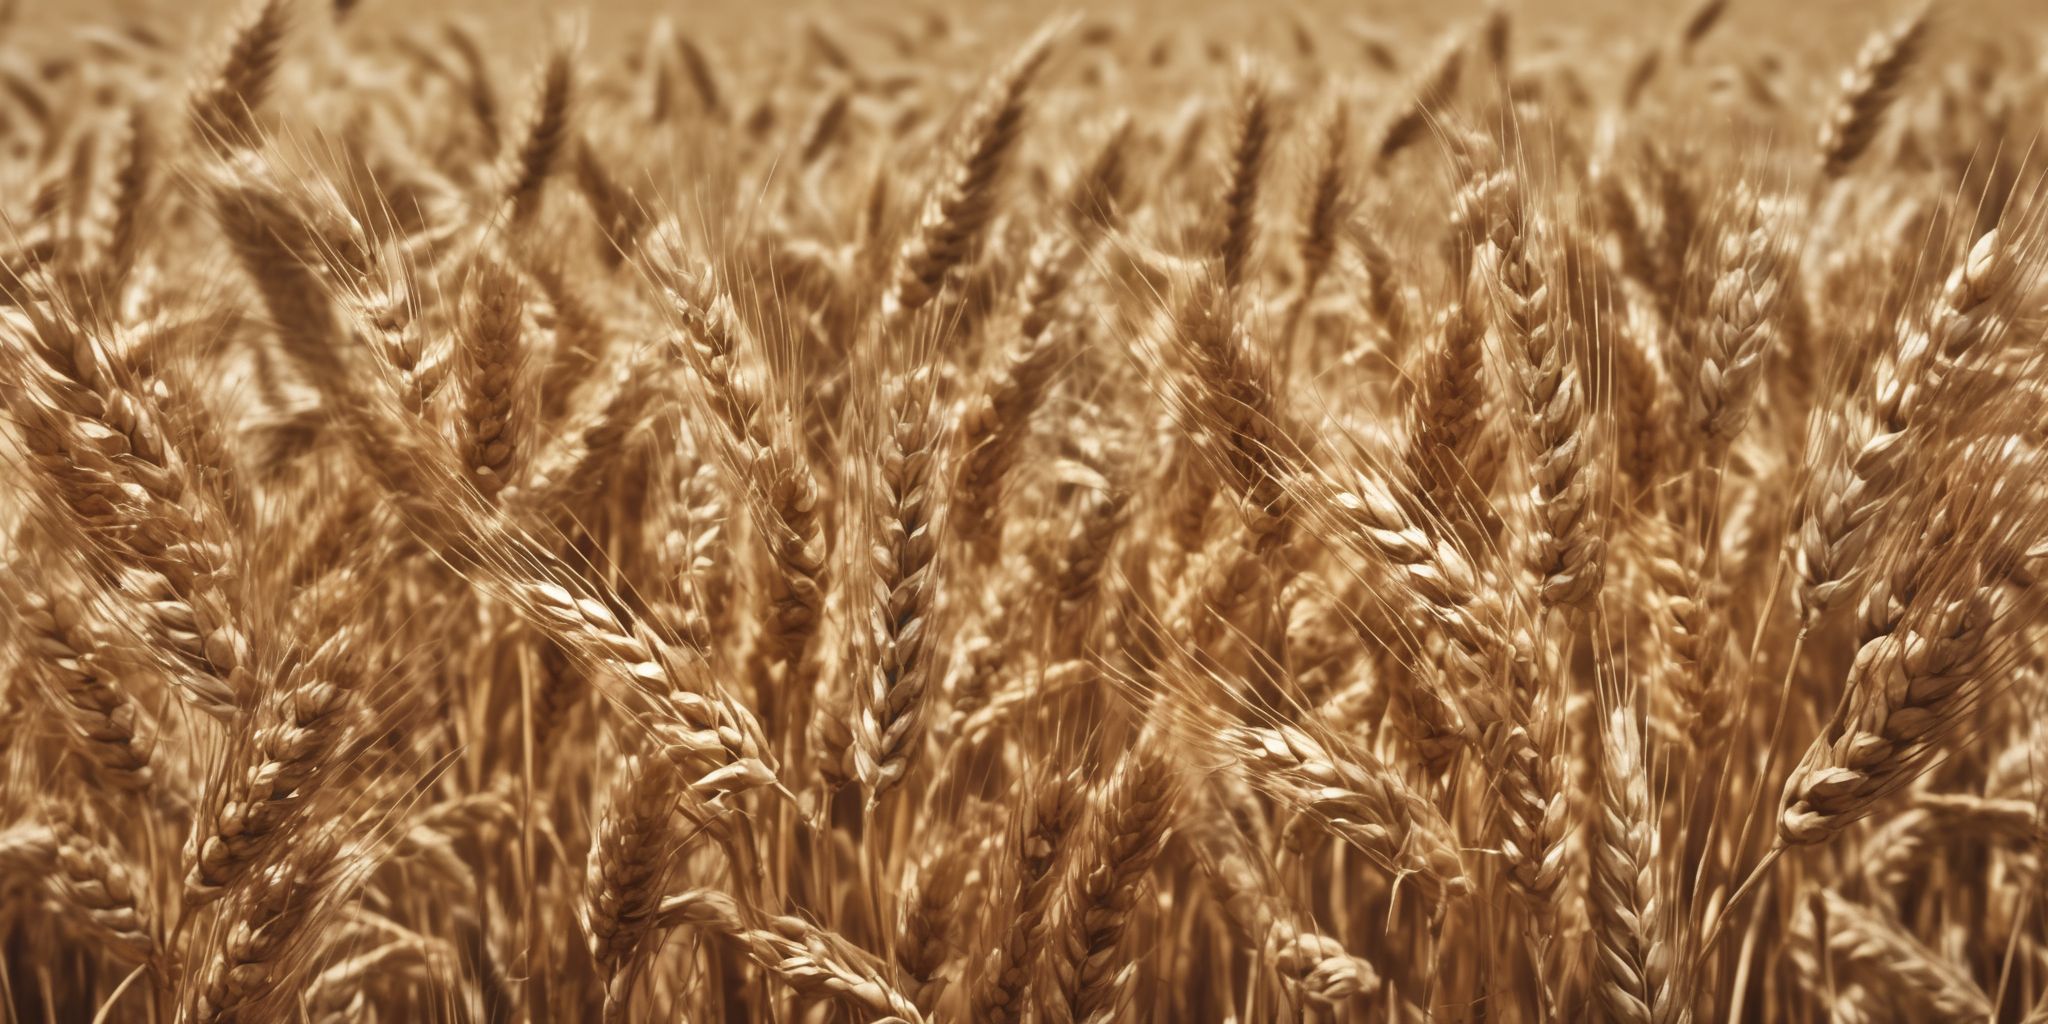 Wheat  in realistic, photographic style